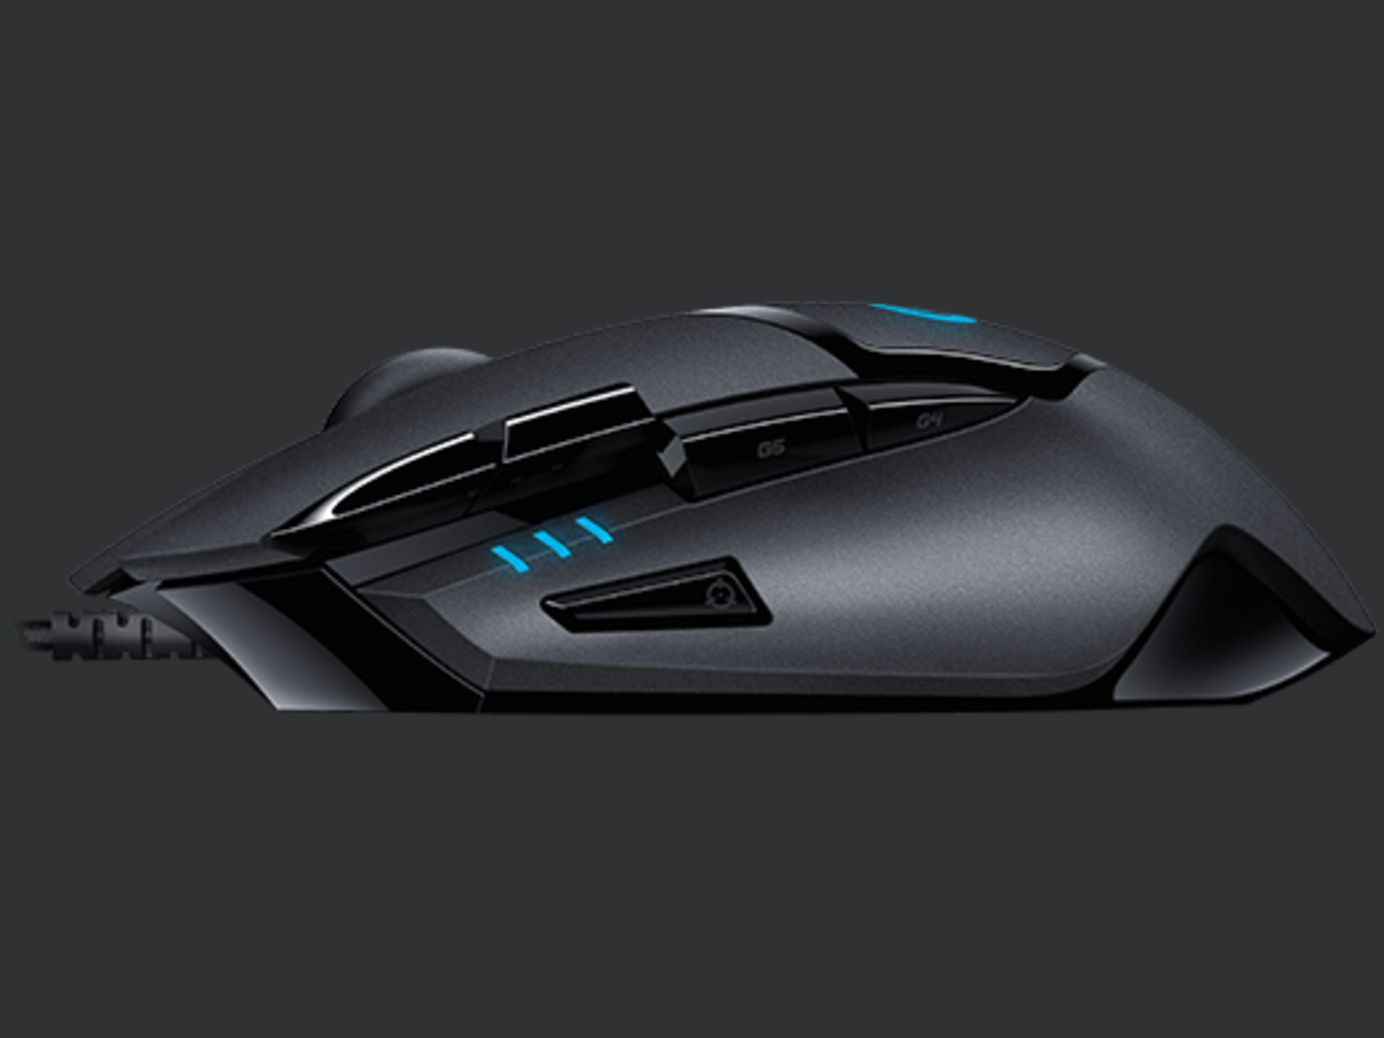 g402-hyperion-fury-ultra-fast-fps-gaming-mouse31.png.imgw.1384.1038